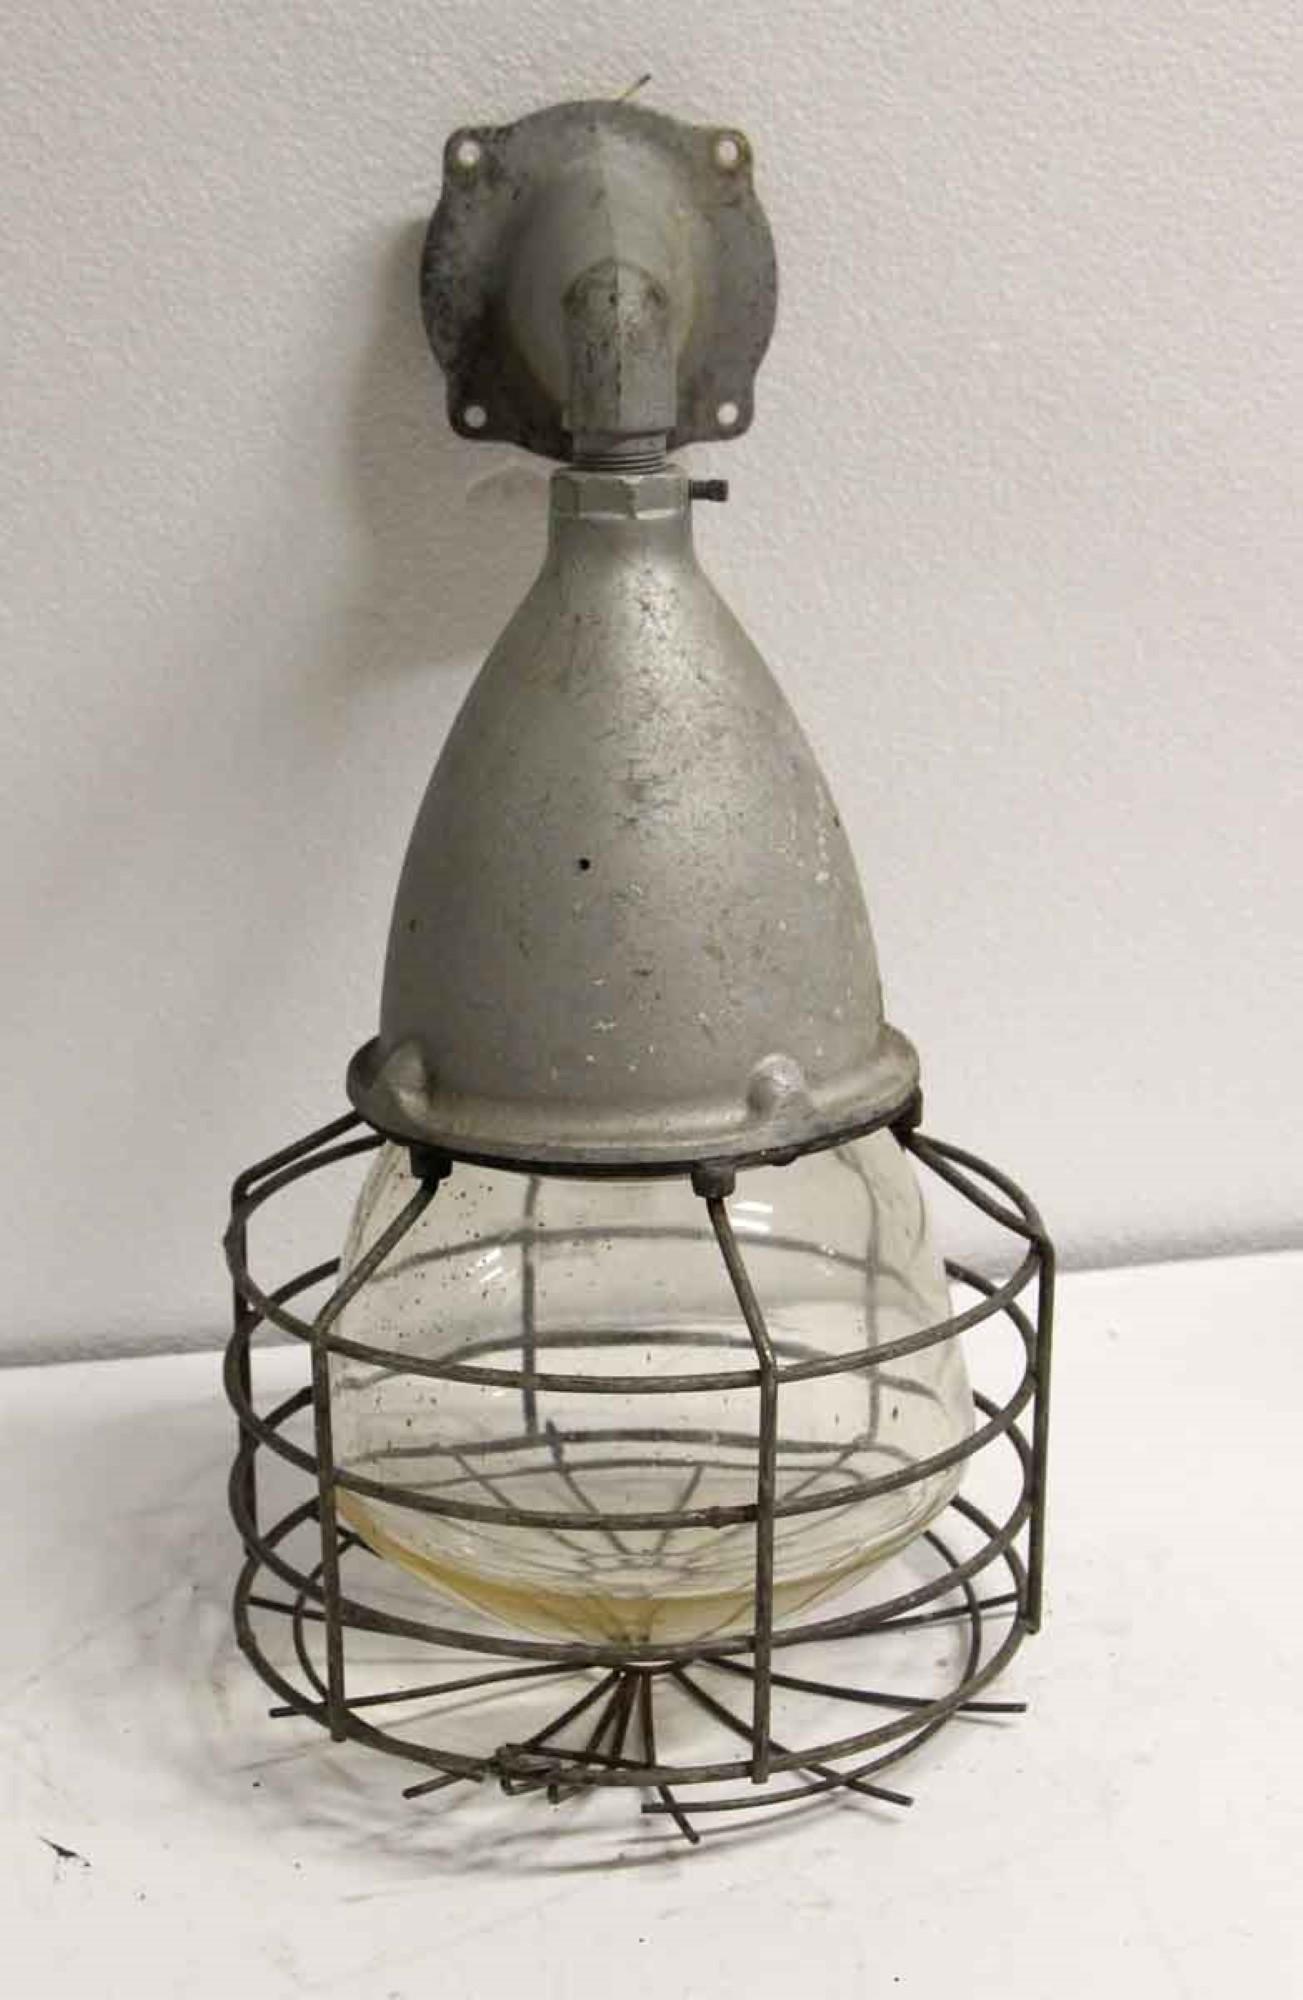 1940s industrial or nautical style cage light glass sconce with the original glass glob. Made by Crouse Hinds. Price includes rewiring. This can be seen at our 400 Gilligan St location in Scranton. PA.